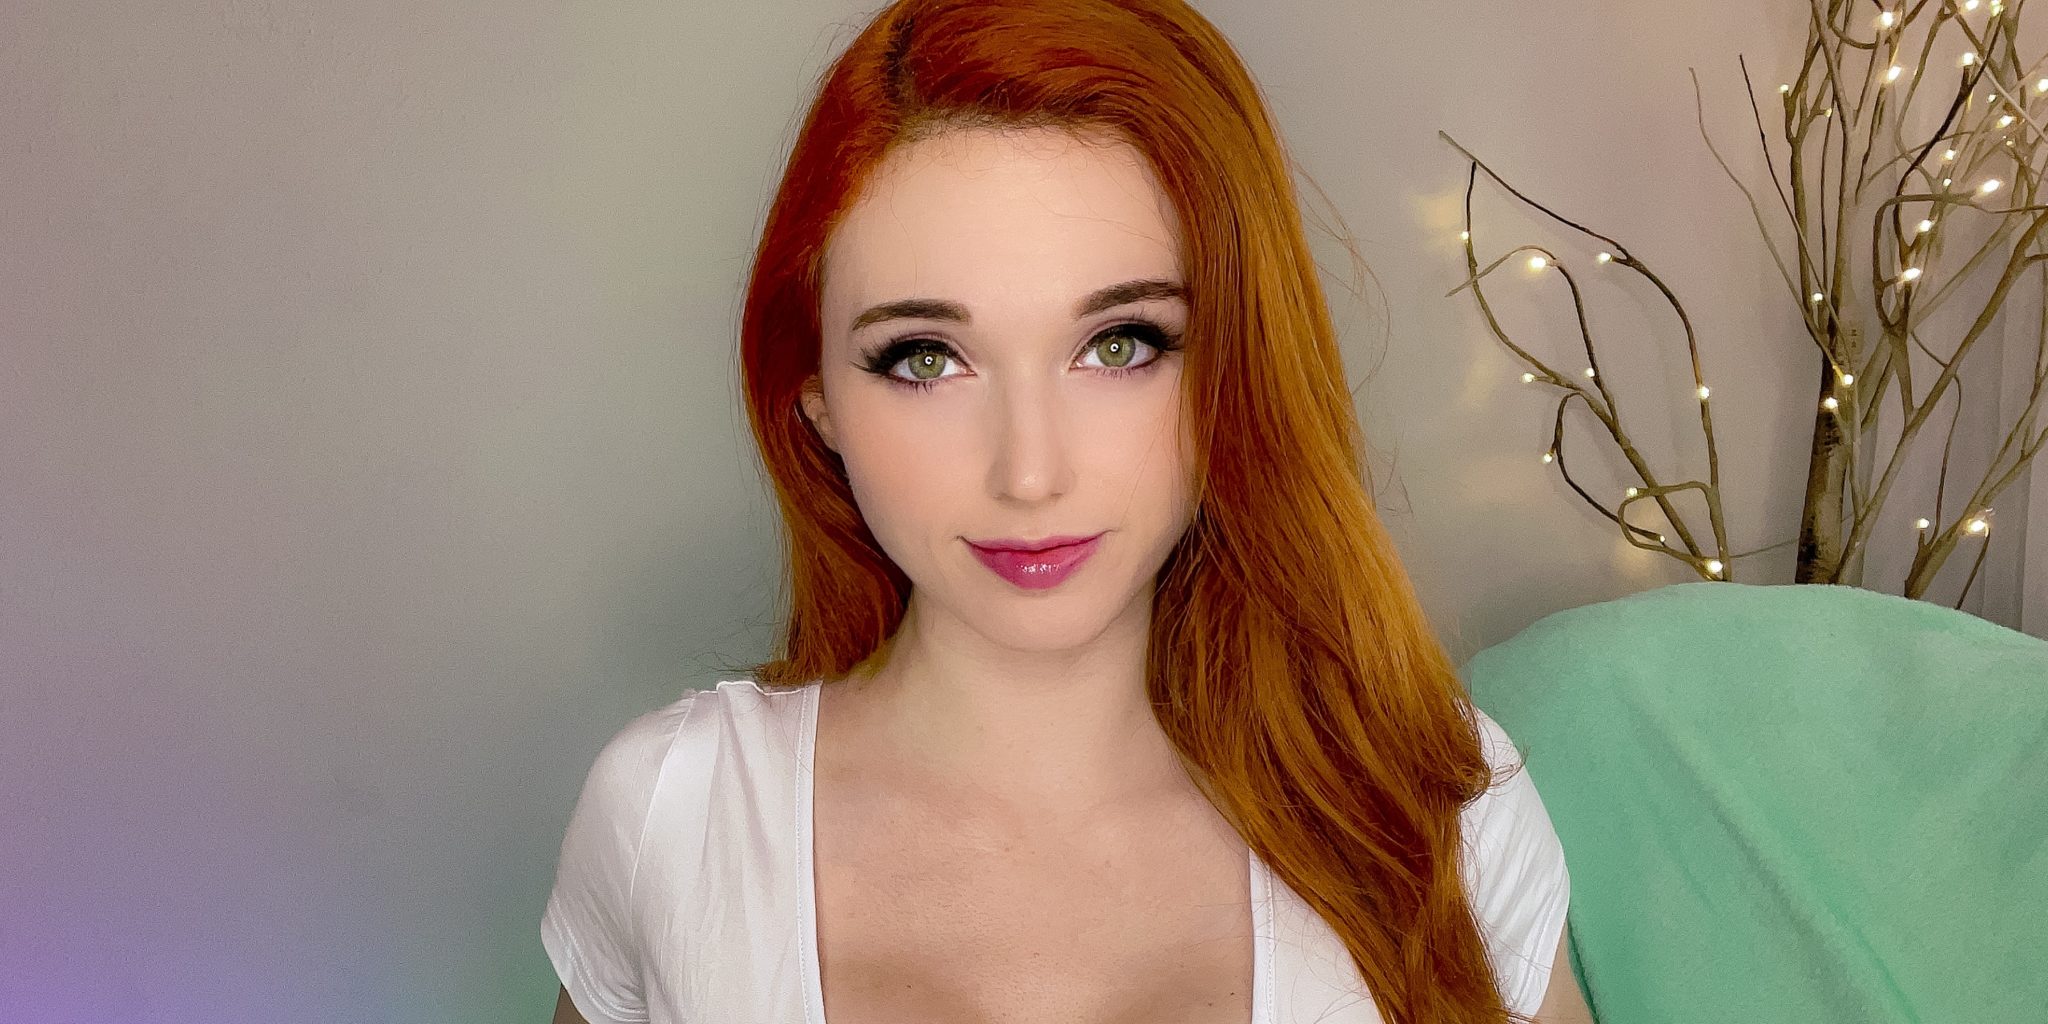 Why was Amouranth banned from Twitch, Instagram, and TikTok? 